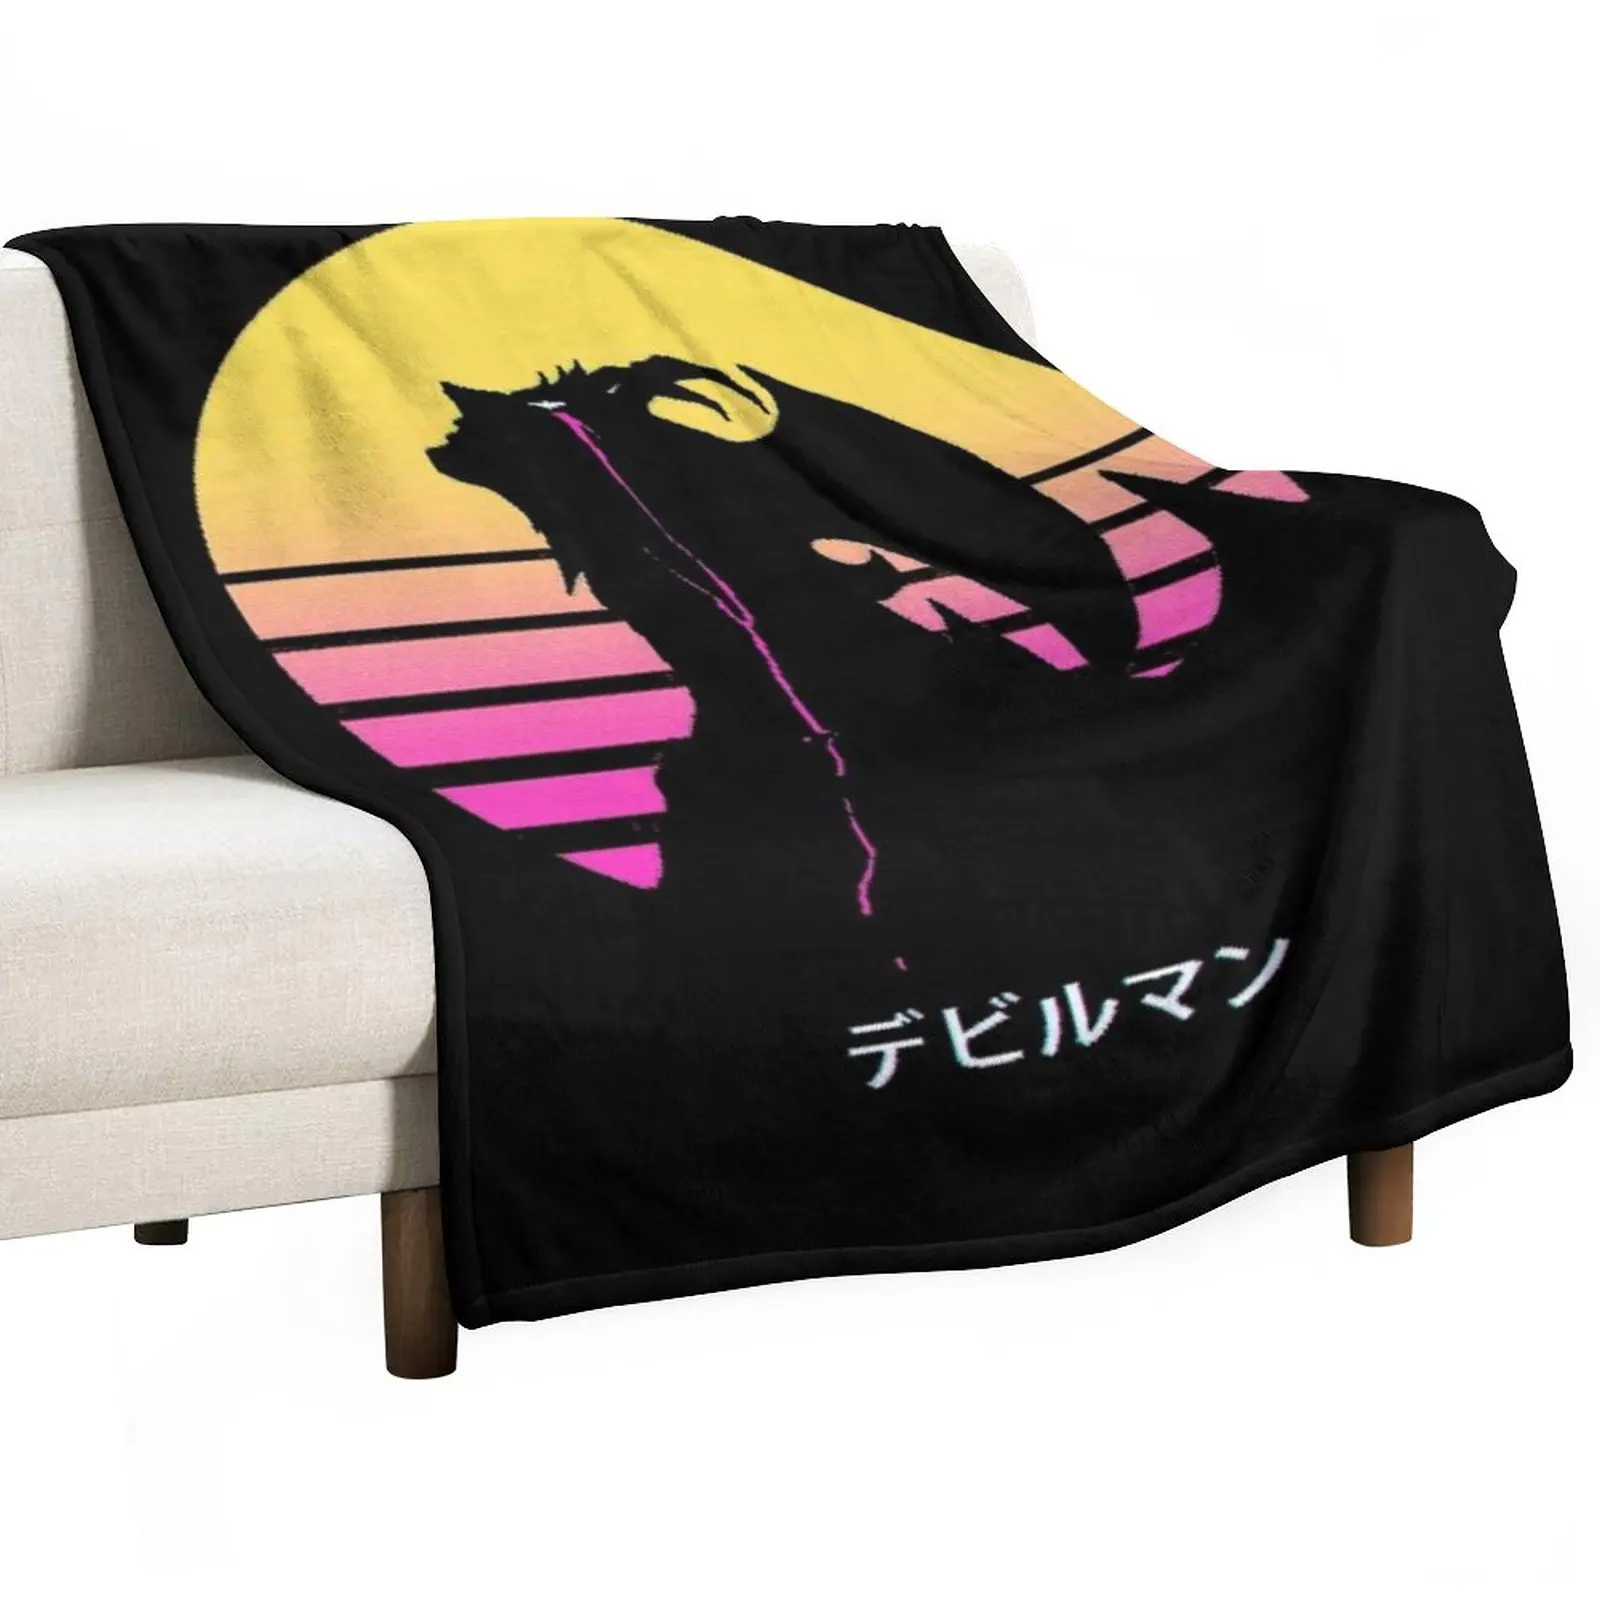 

Devilman - Akira Fudo Colorful Moon Design in all Products Throw Blanket Fluffy Soft Blankets Plaid